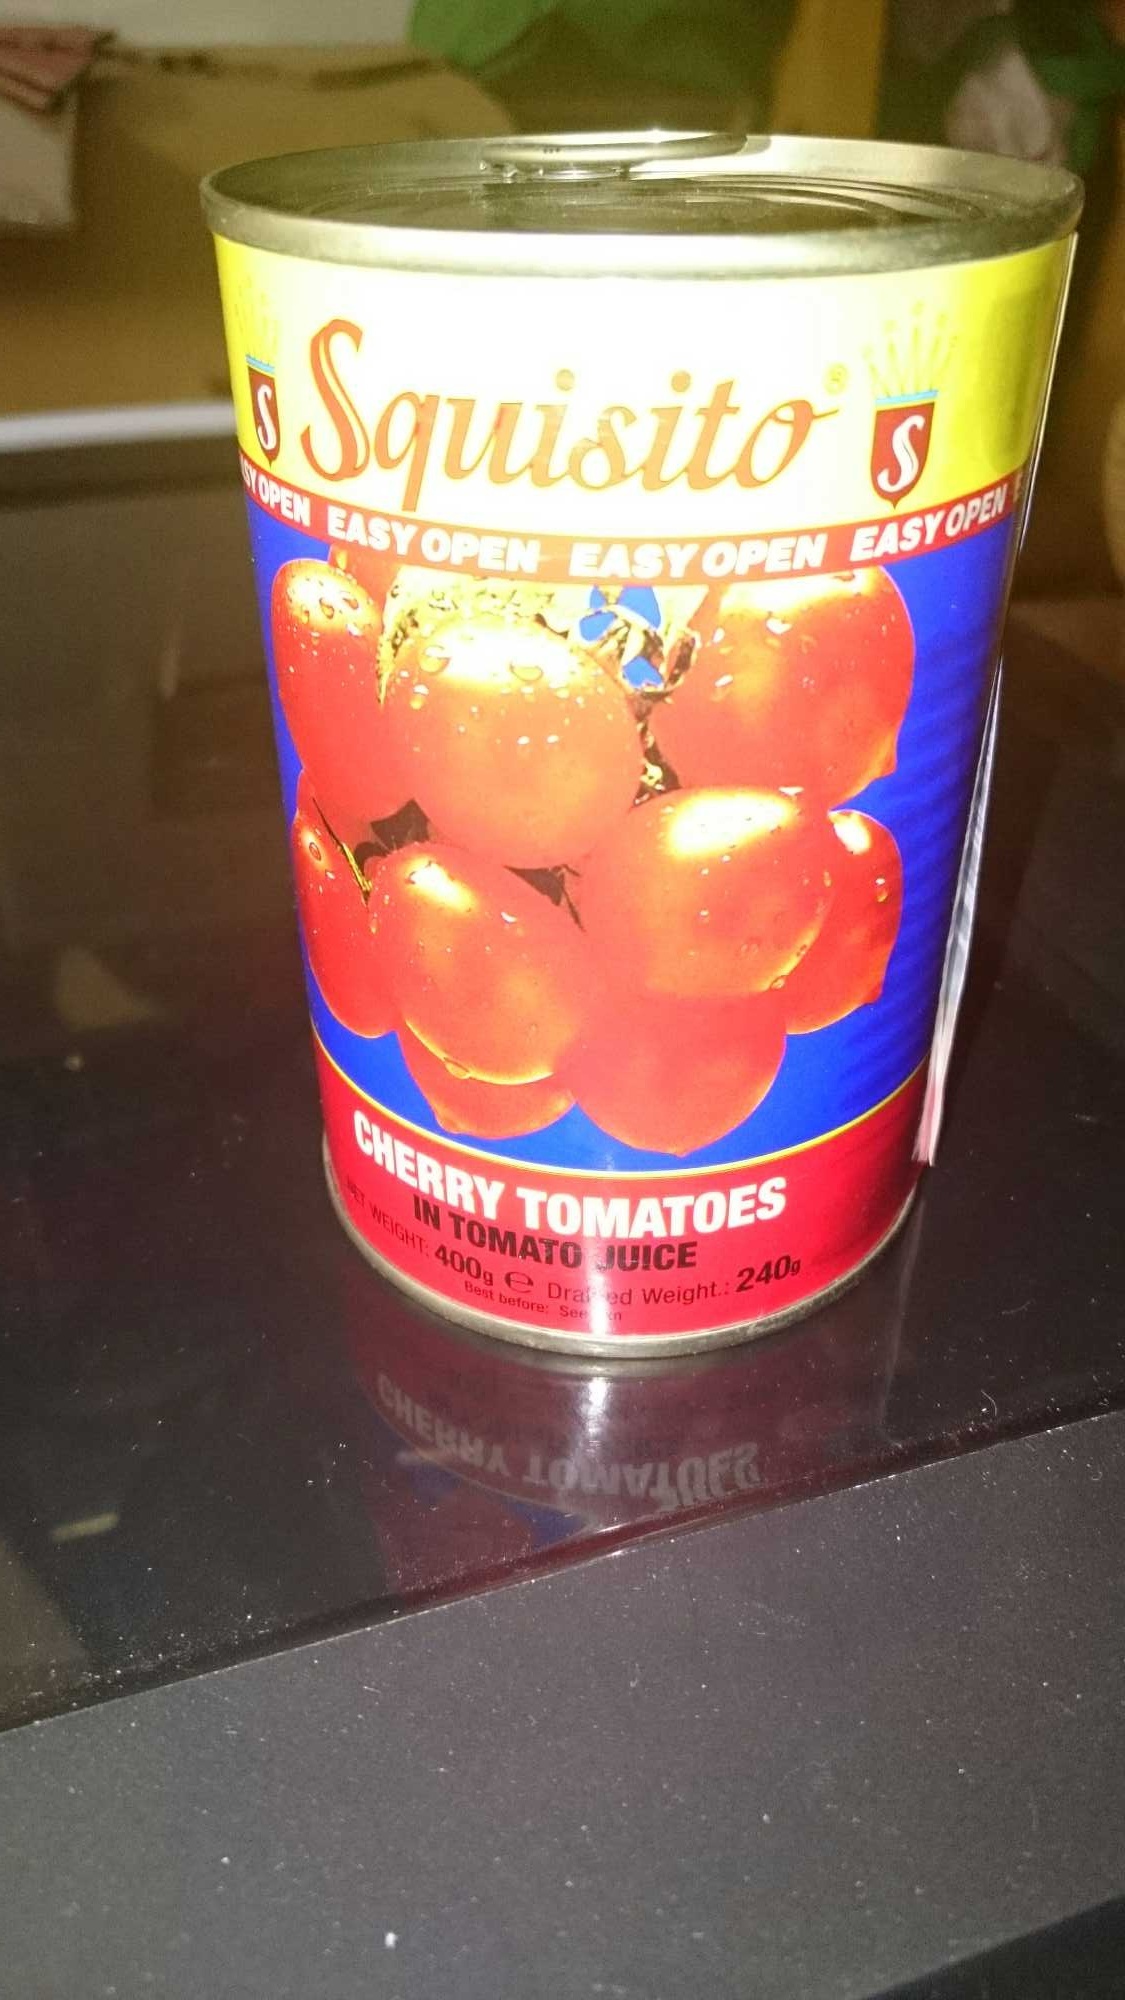 cherry tomatoes in tomato juice - Product